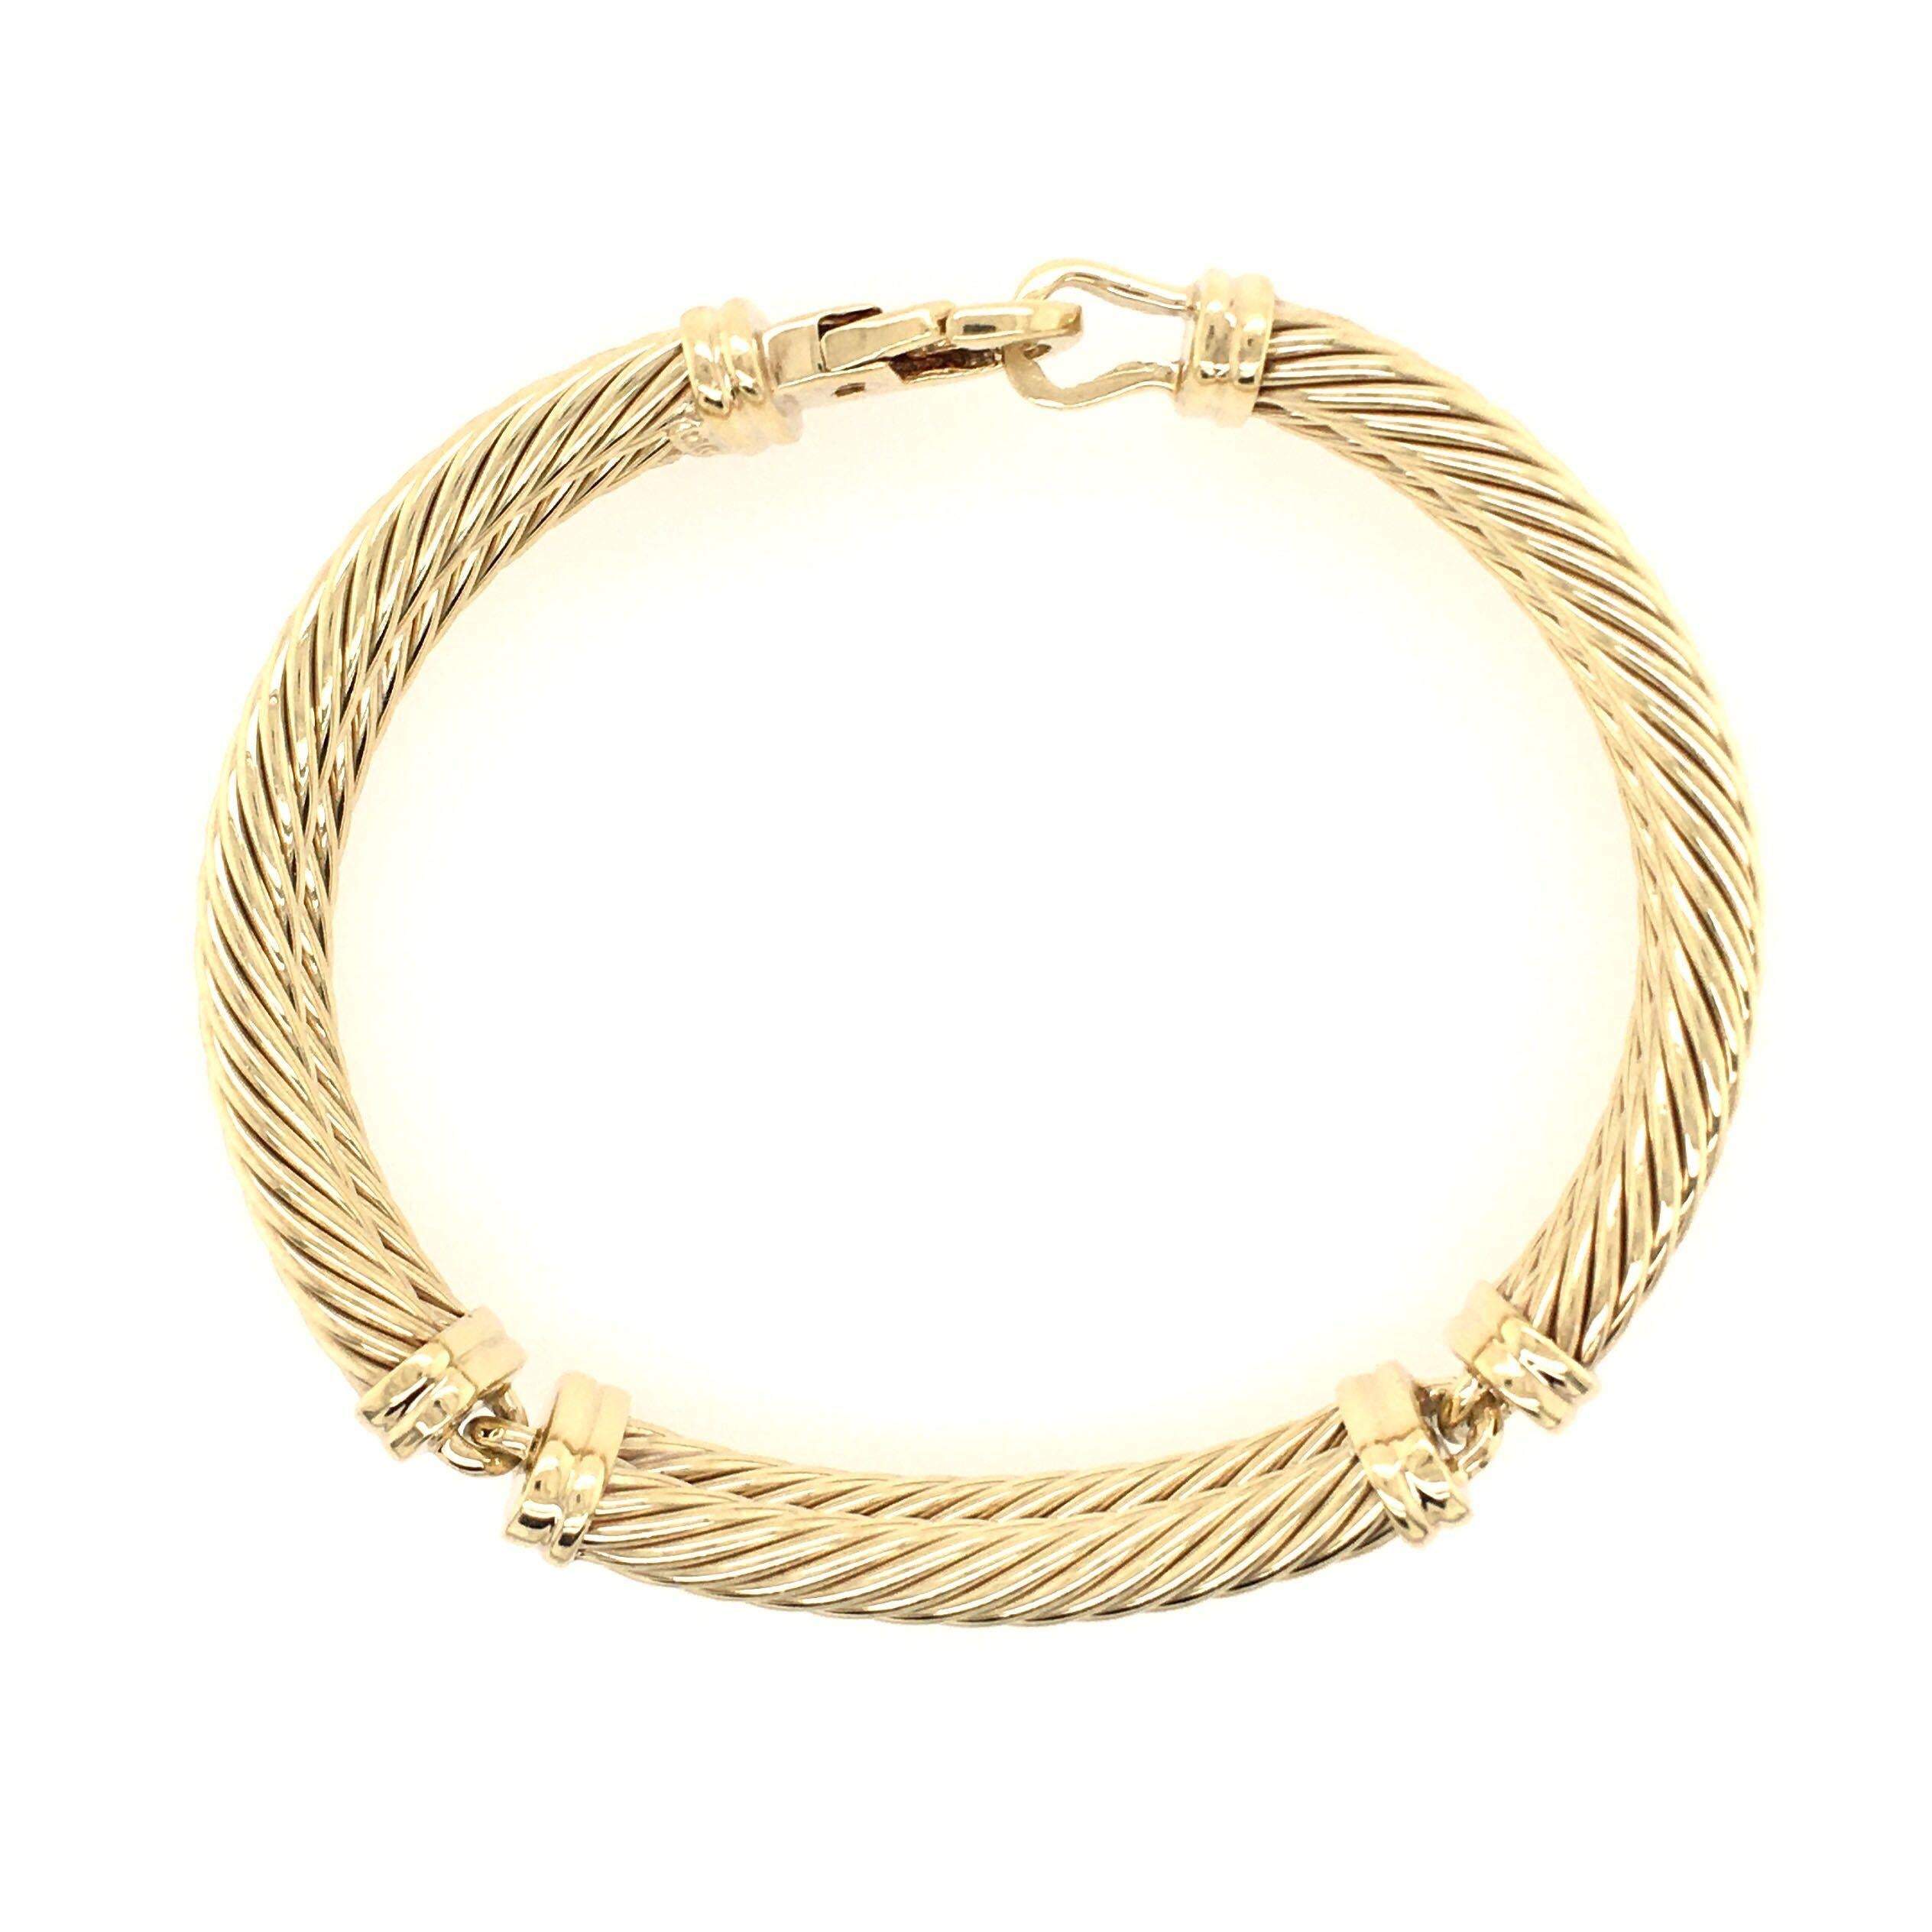 A 14 karat yellow gold bracelet. David Yurman. Designed as curved ropework links. Length is approximately 7 inches, gross weight is approximately 38.2 grams. Stamped D.Y. for David Yurman, 14K.